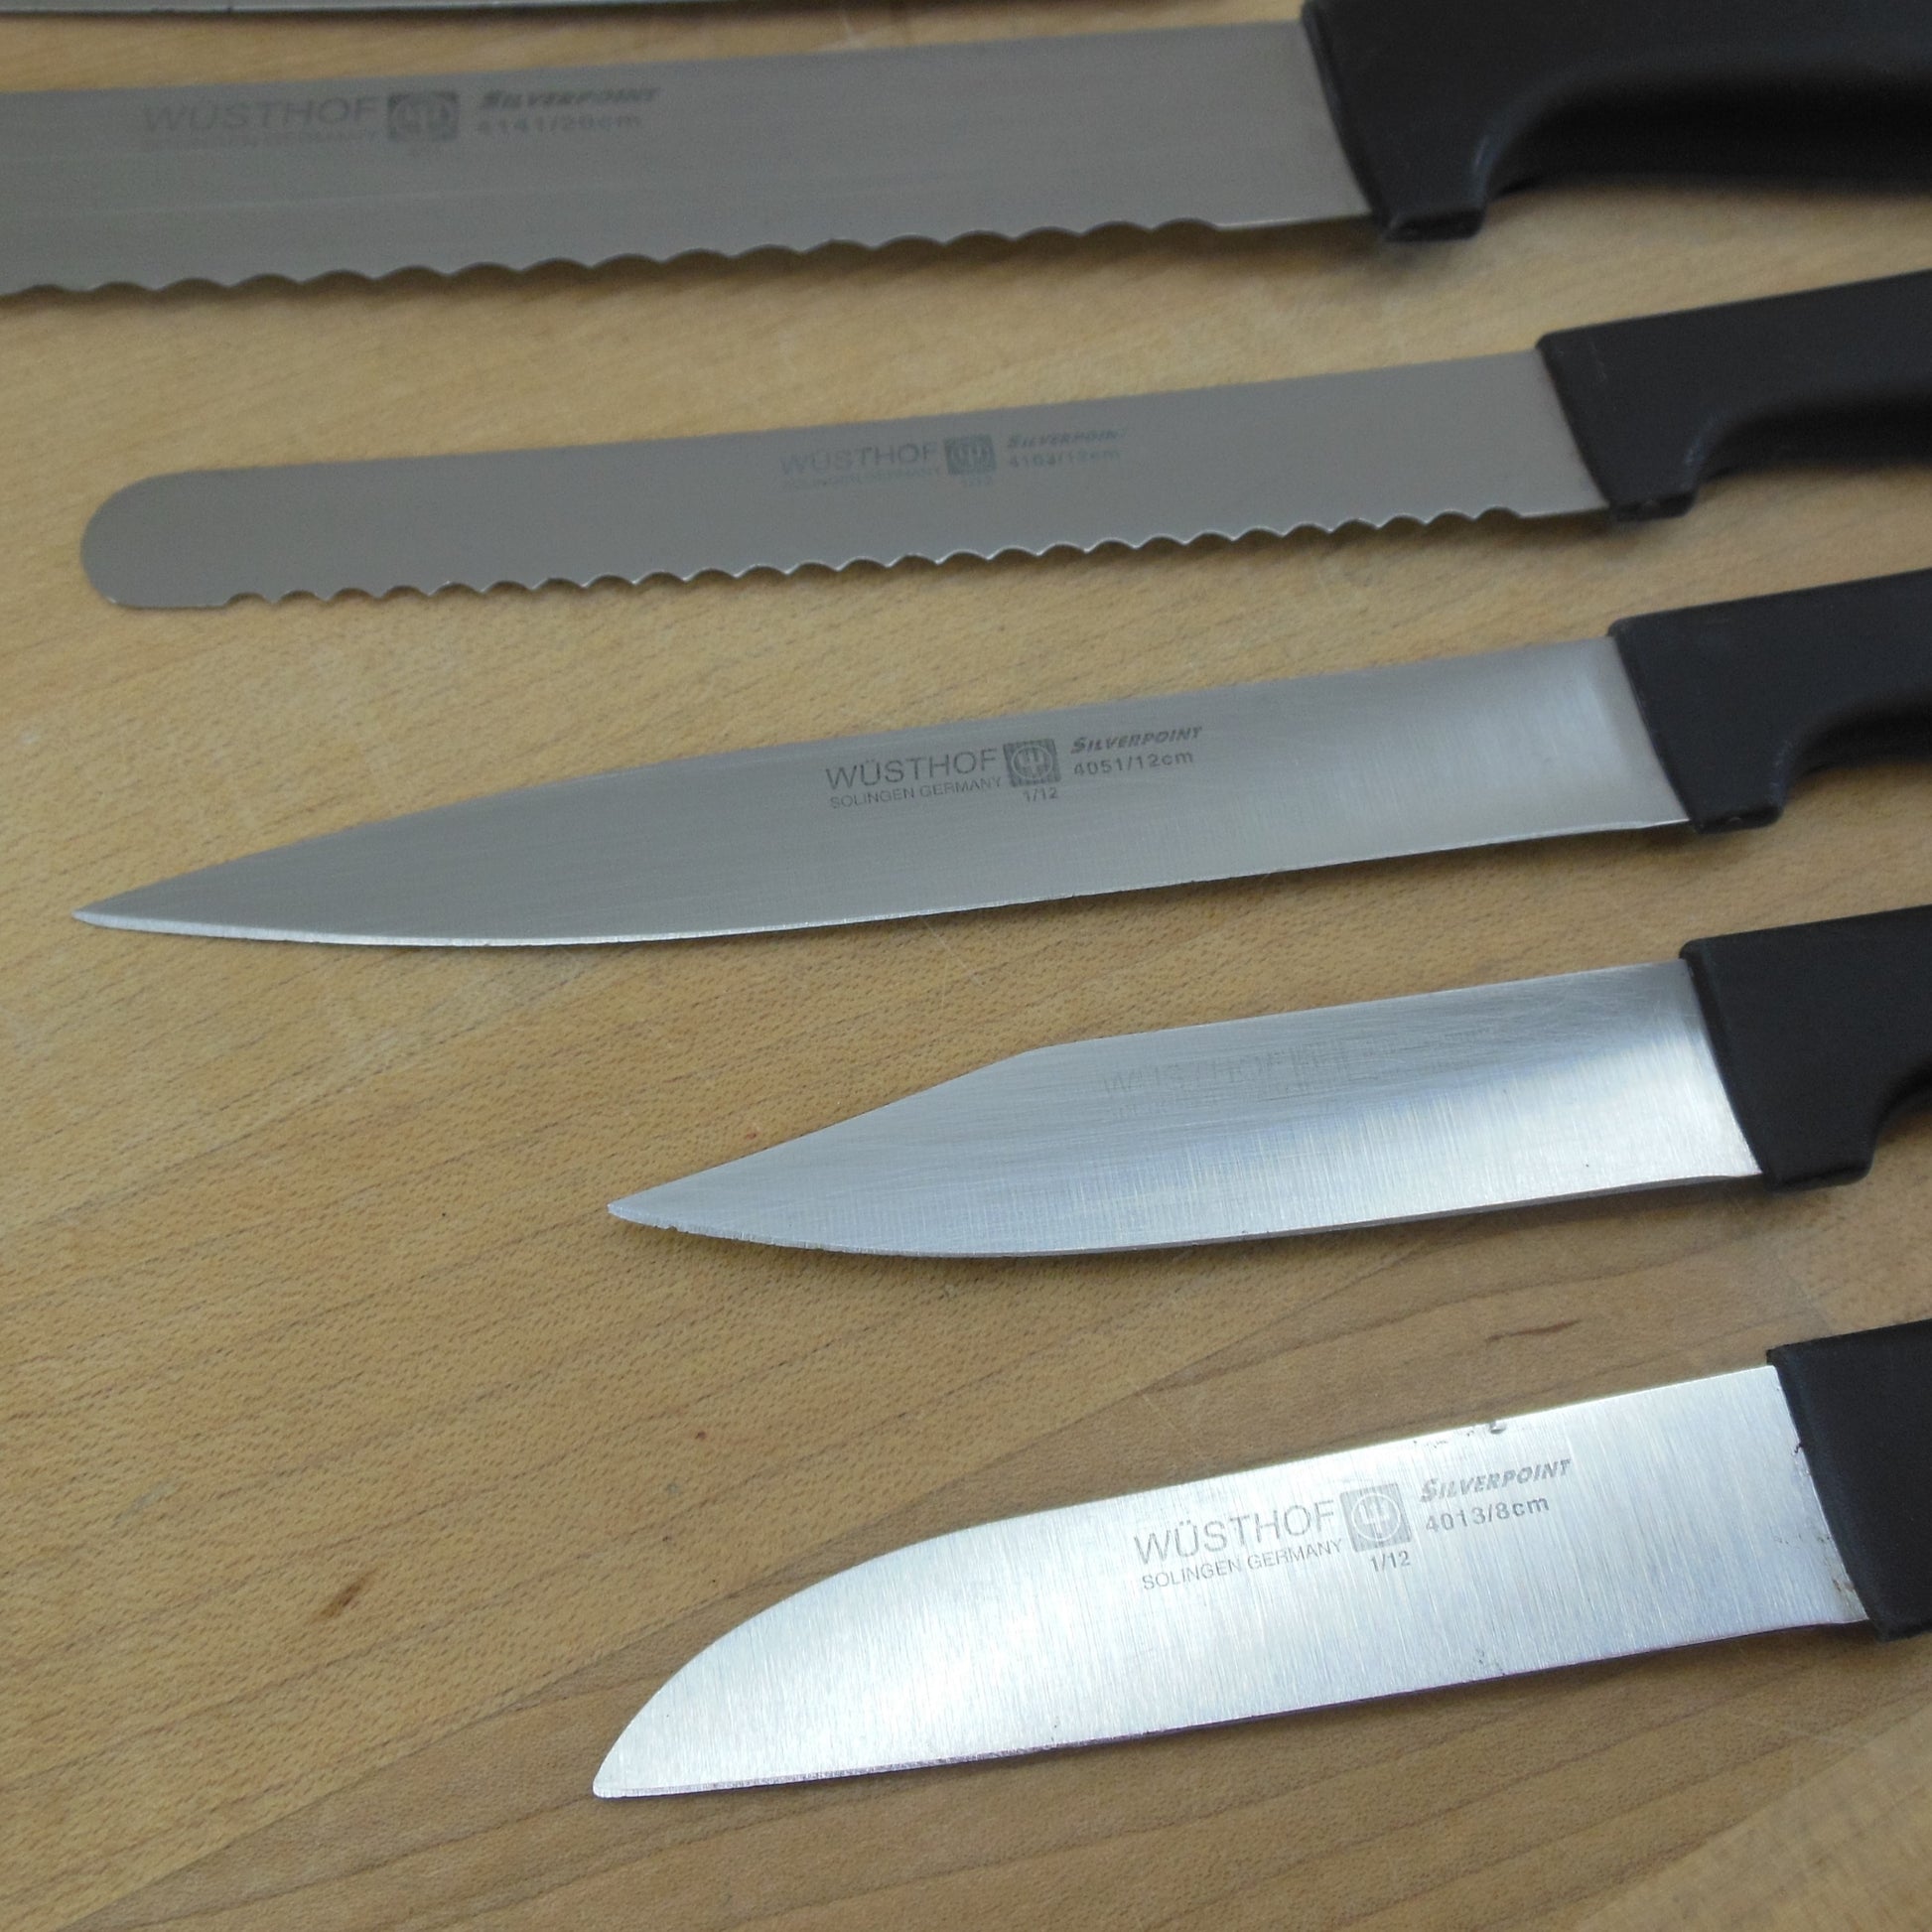 Wusthof Solingen Germany Silverpoint 7 Piece Stainless Knife Set used